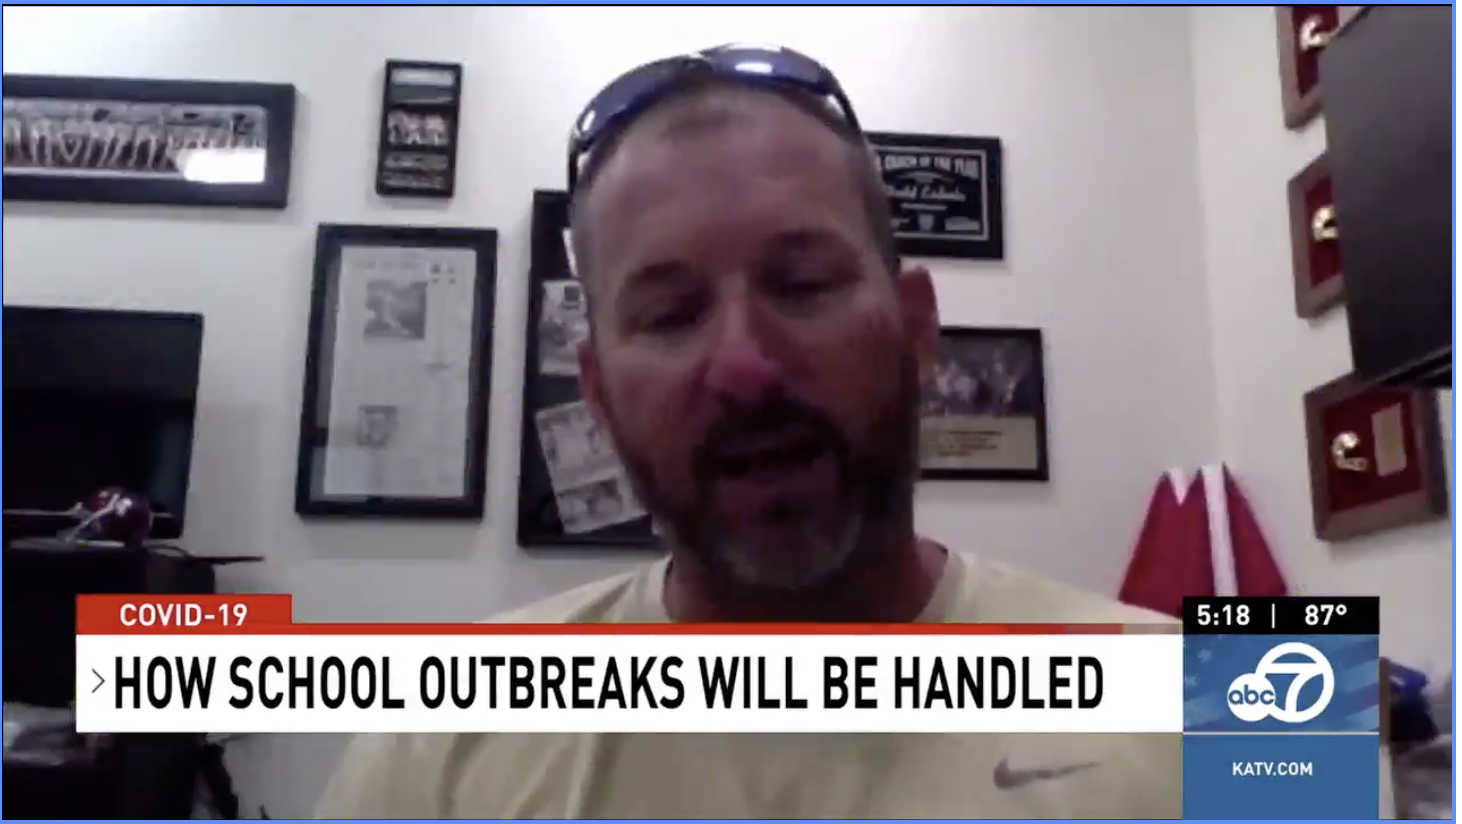 KATV: Schools response to COVID-19 cases will depend on outbreak's size